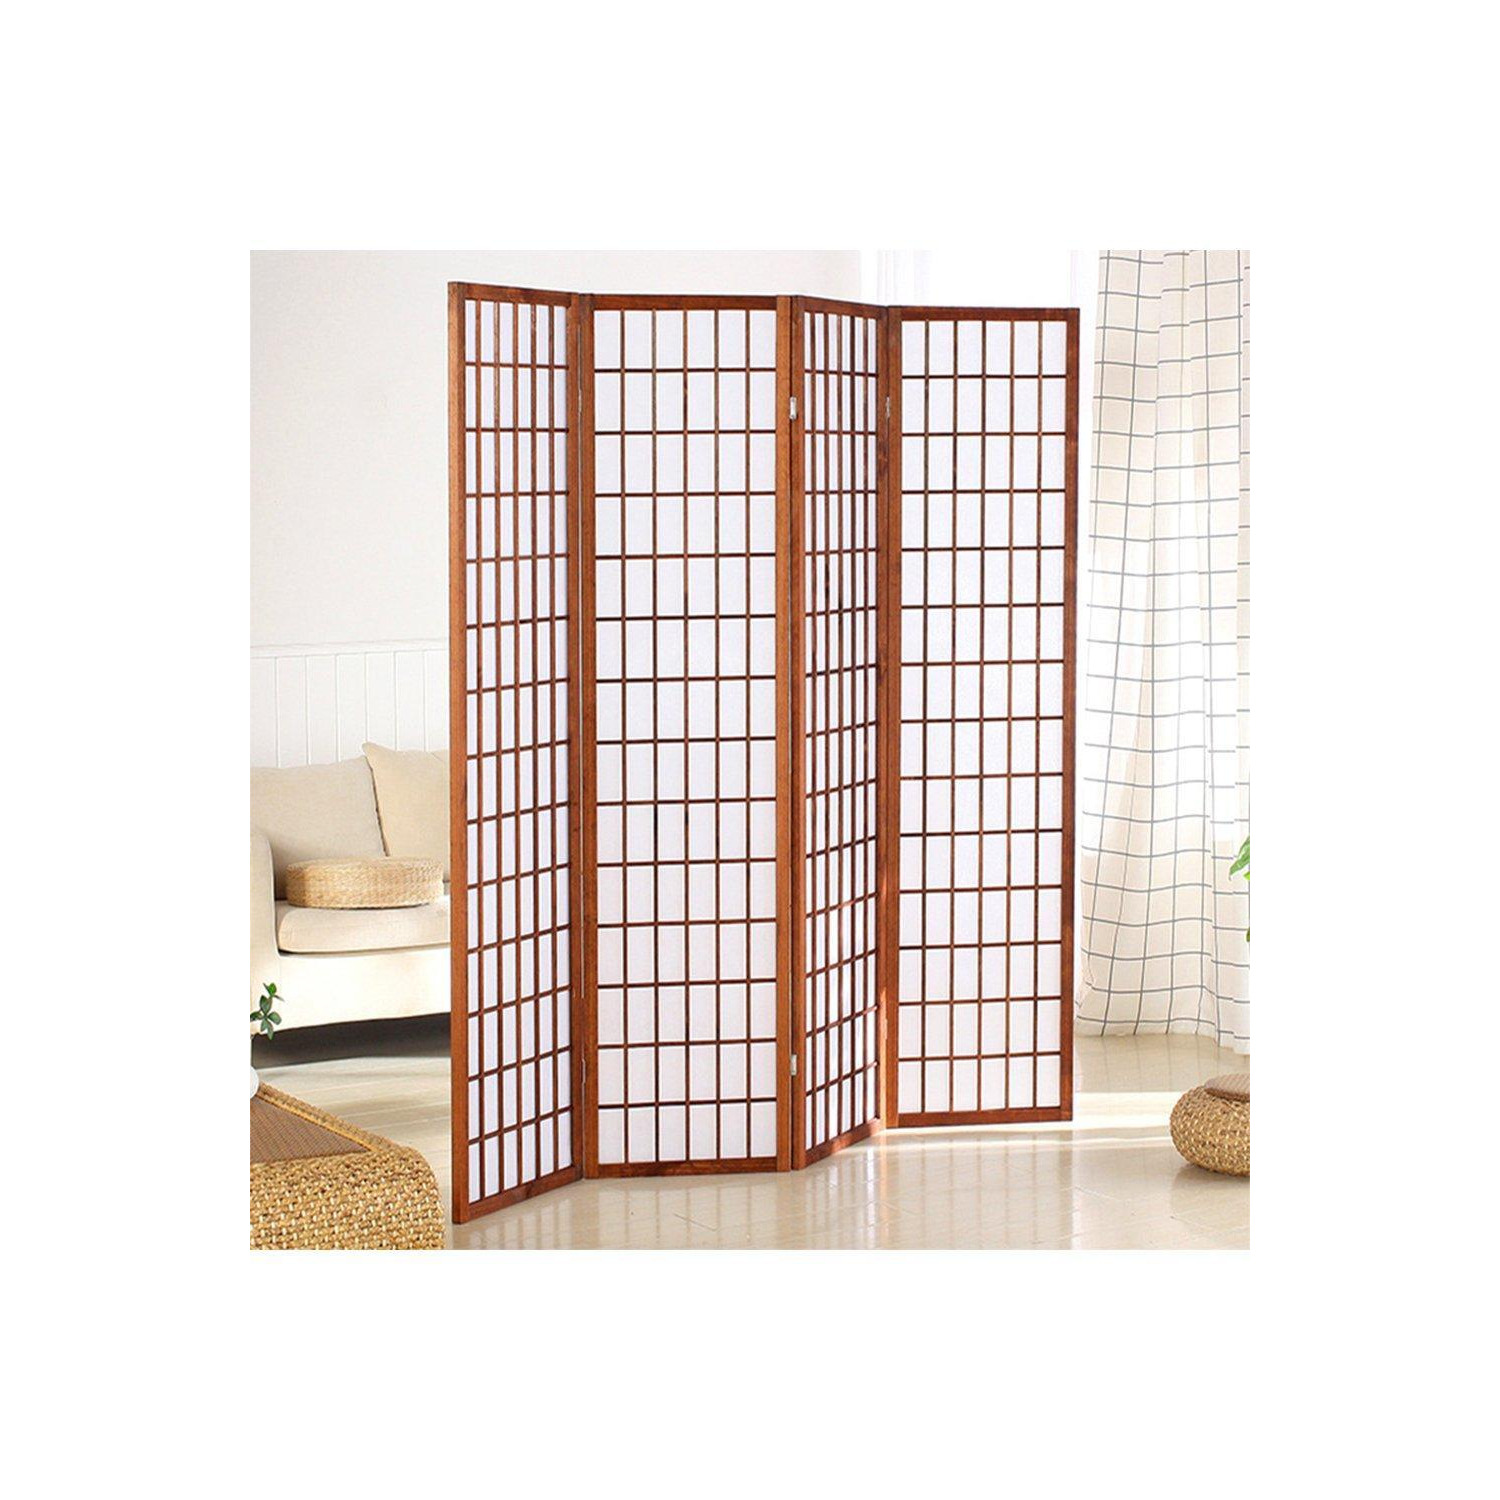 4-Panel Coffee Solid Wood Folding Room Divider Screen - image 1